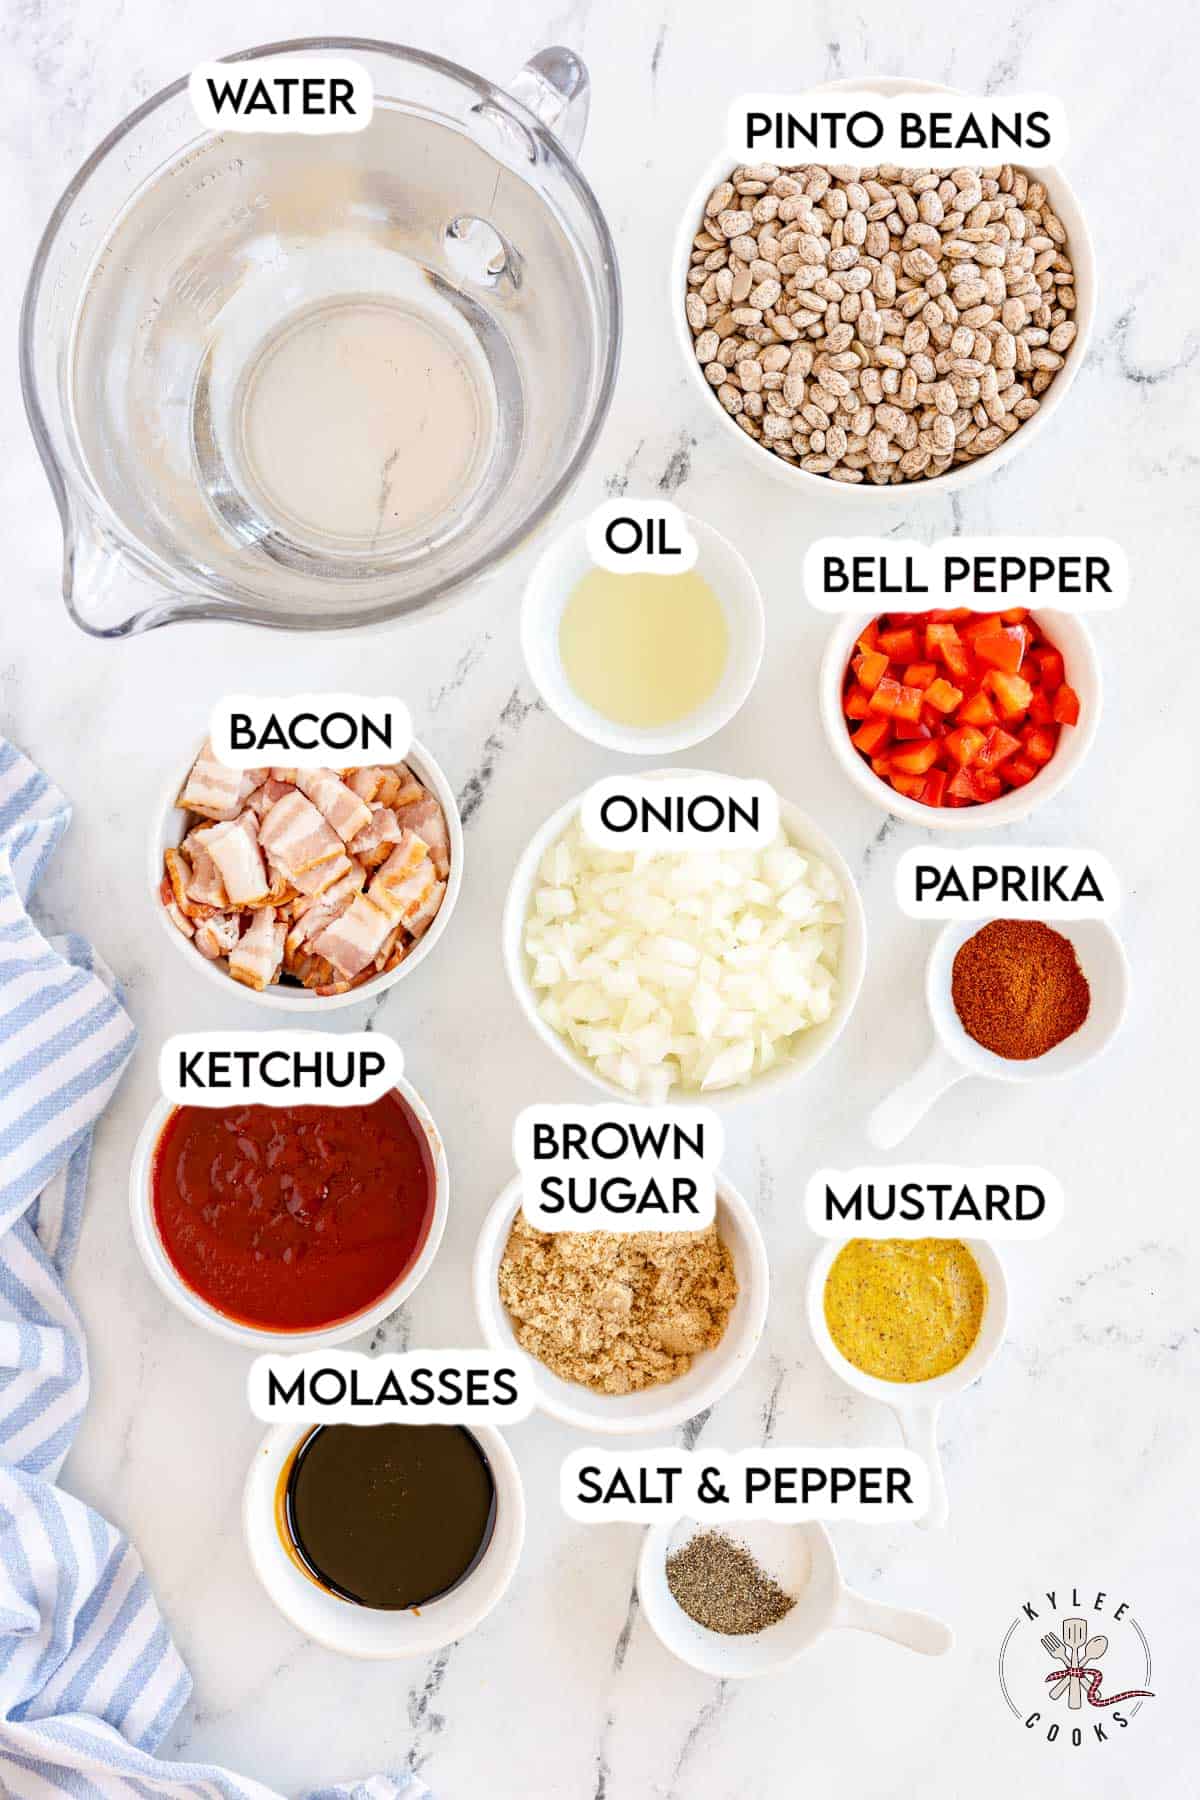 ingredients to make baked beans in the instant pot laid out and labeled.